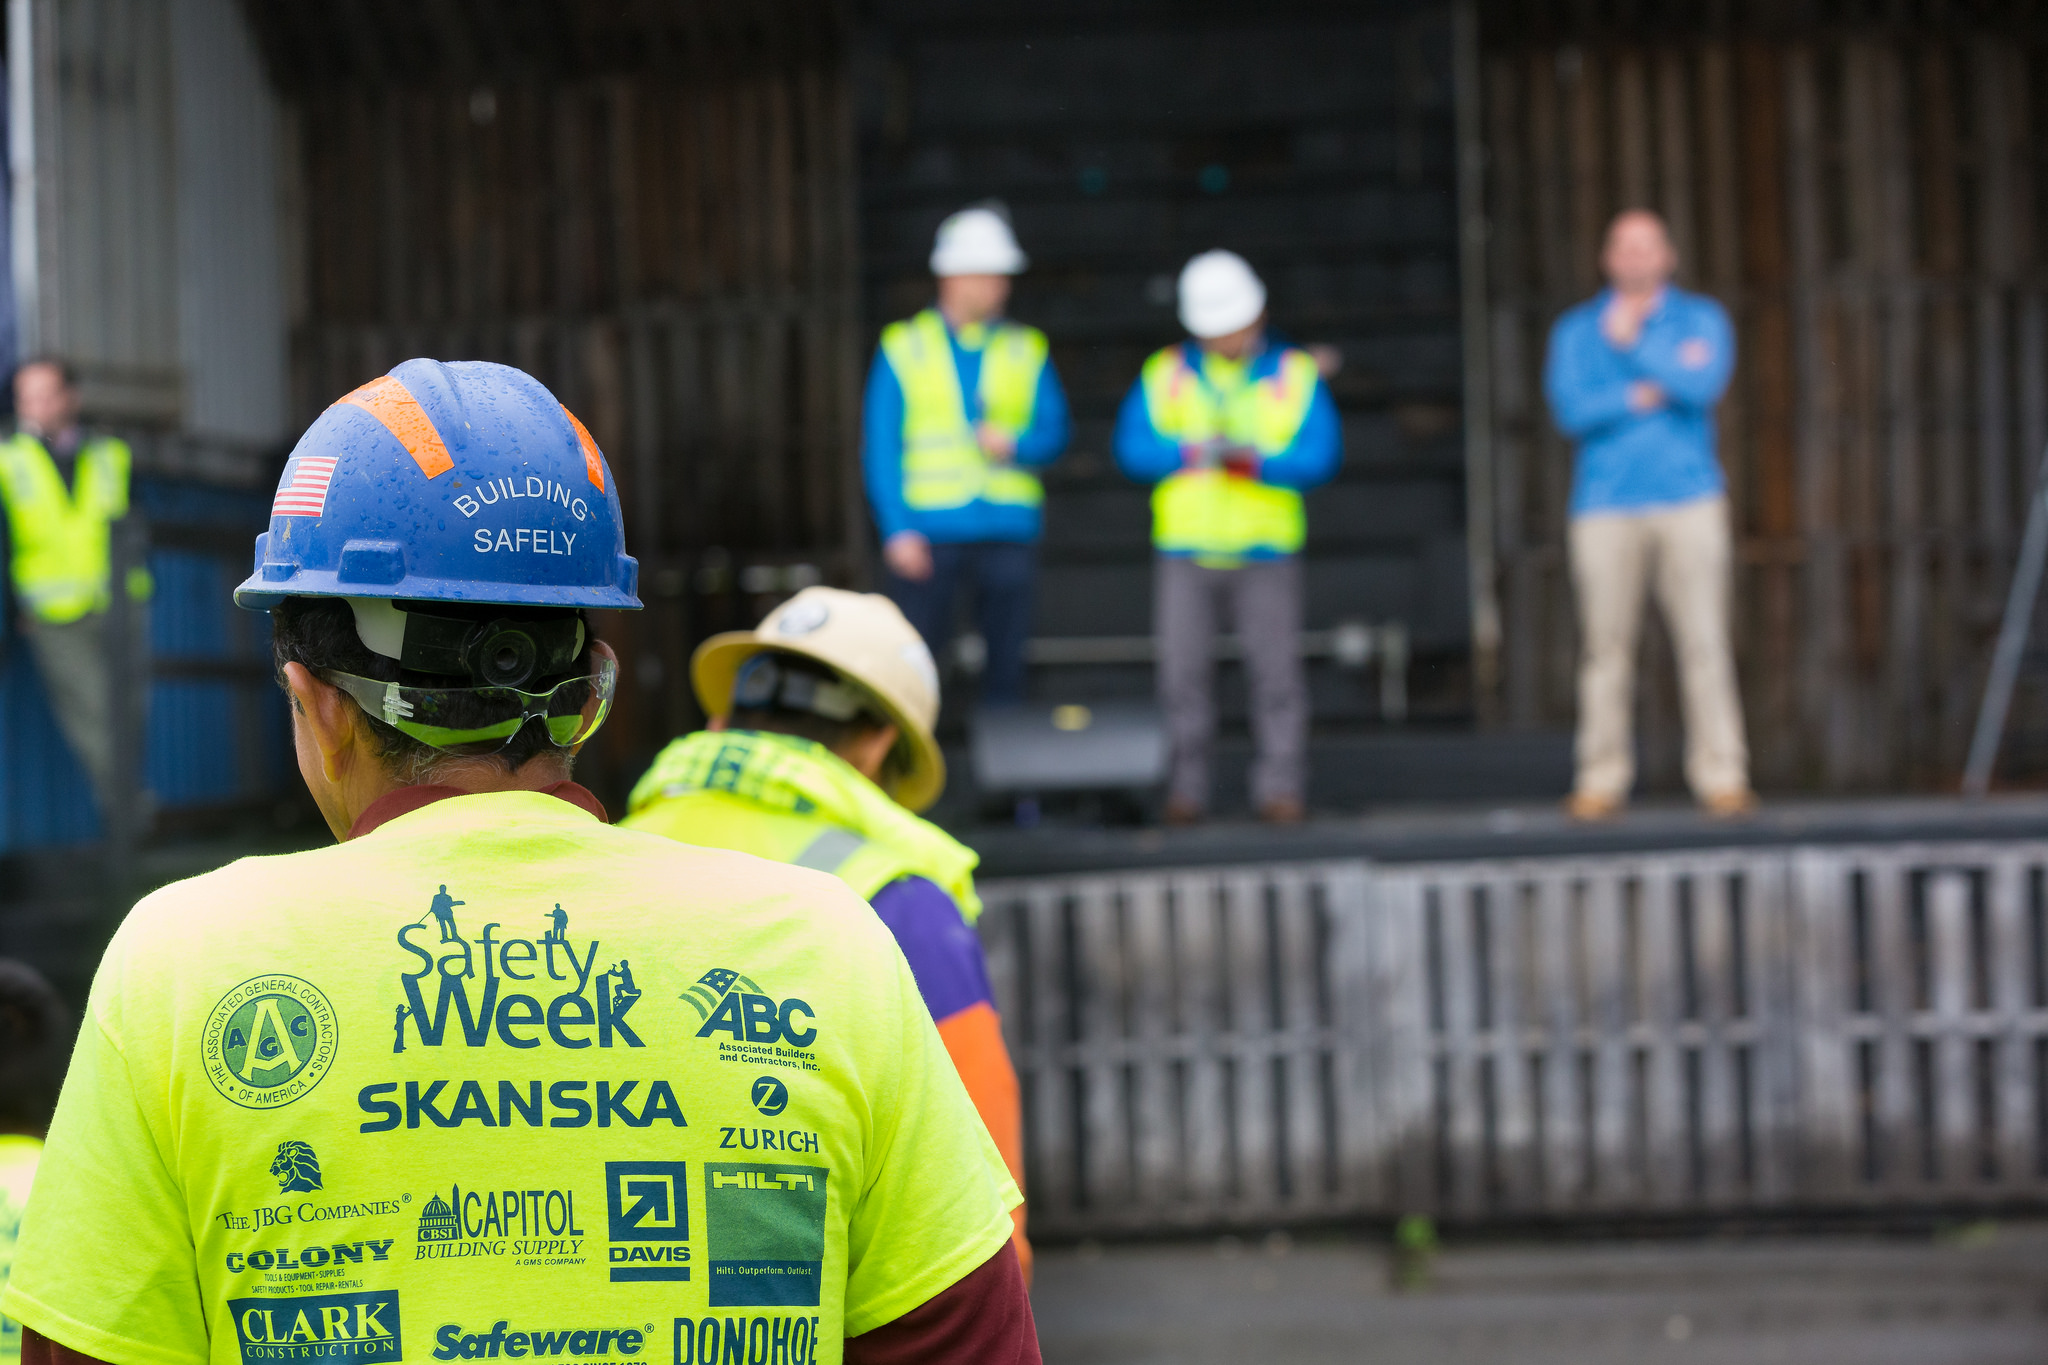 In the foreground, there's a worker wearing a hard hat and a yellow shirt that reads Safety Week. In the background, there are workers wearing hard hats and safety vests standing in an unfinished building.